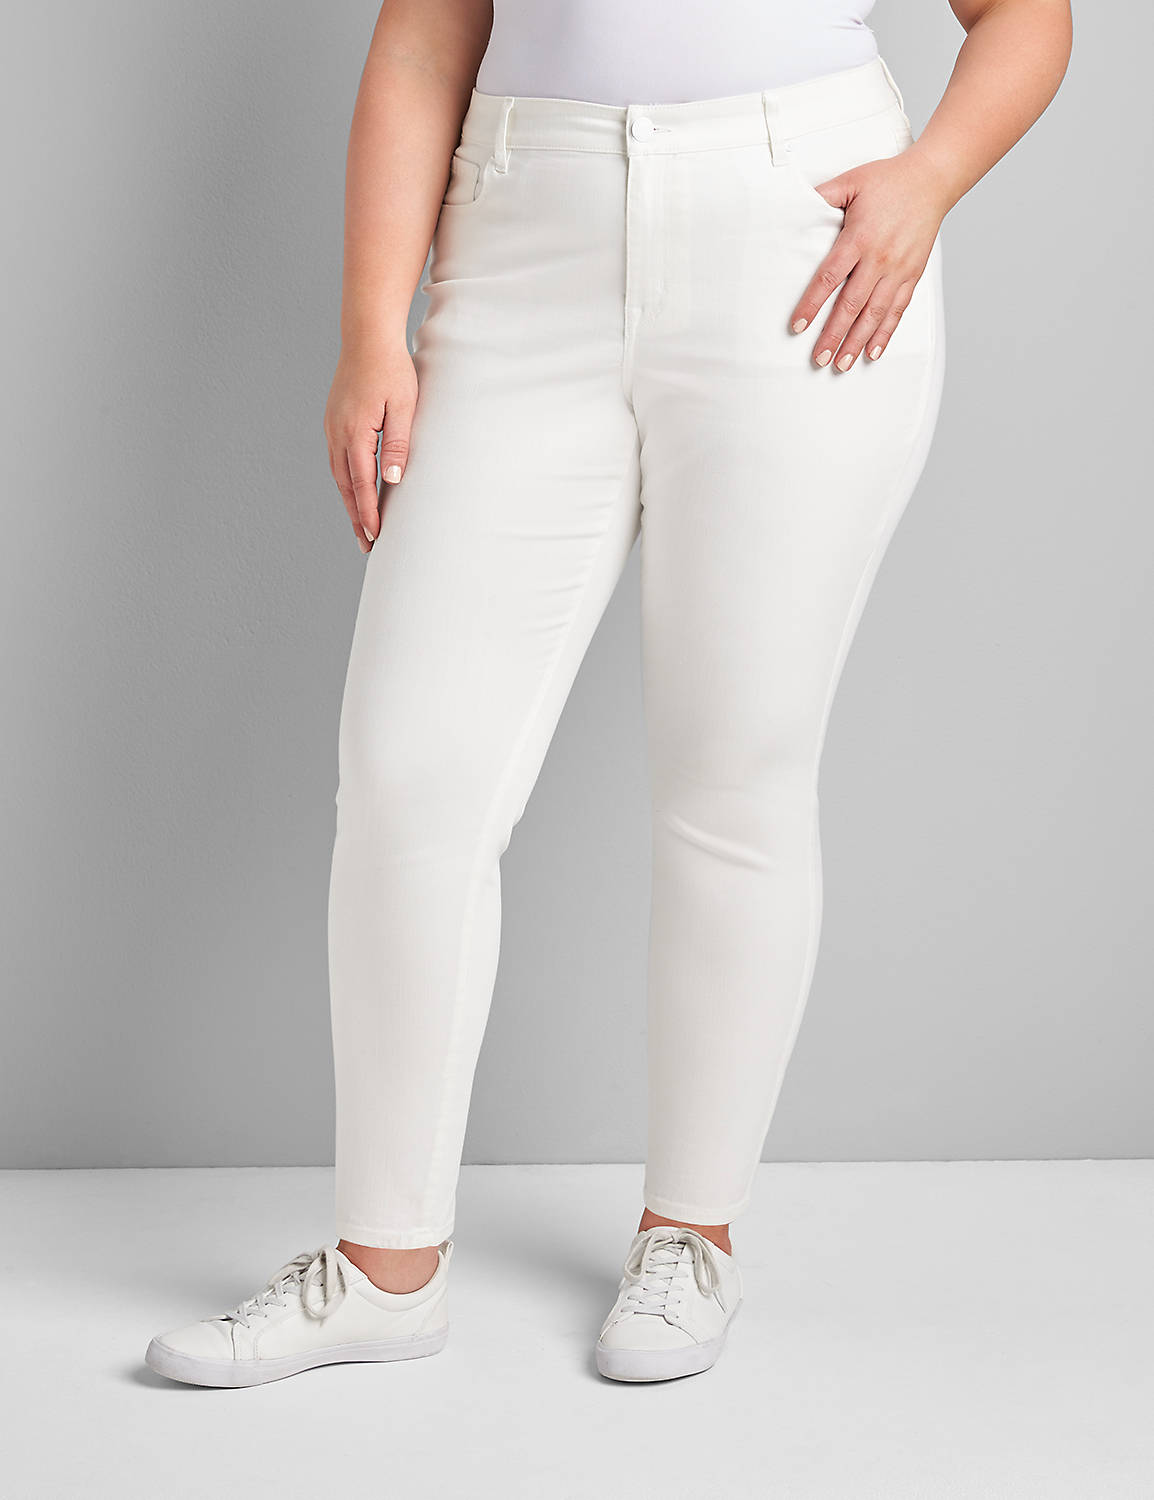 Signature Fit Skinny Jean- White Product Image 1